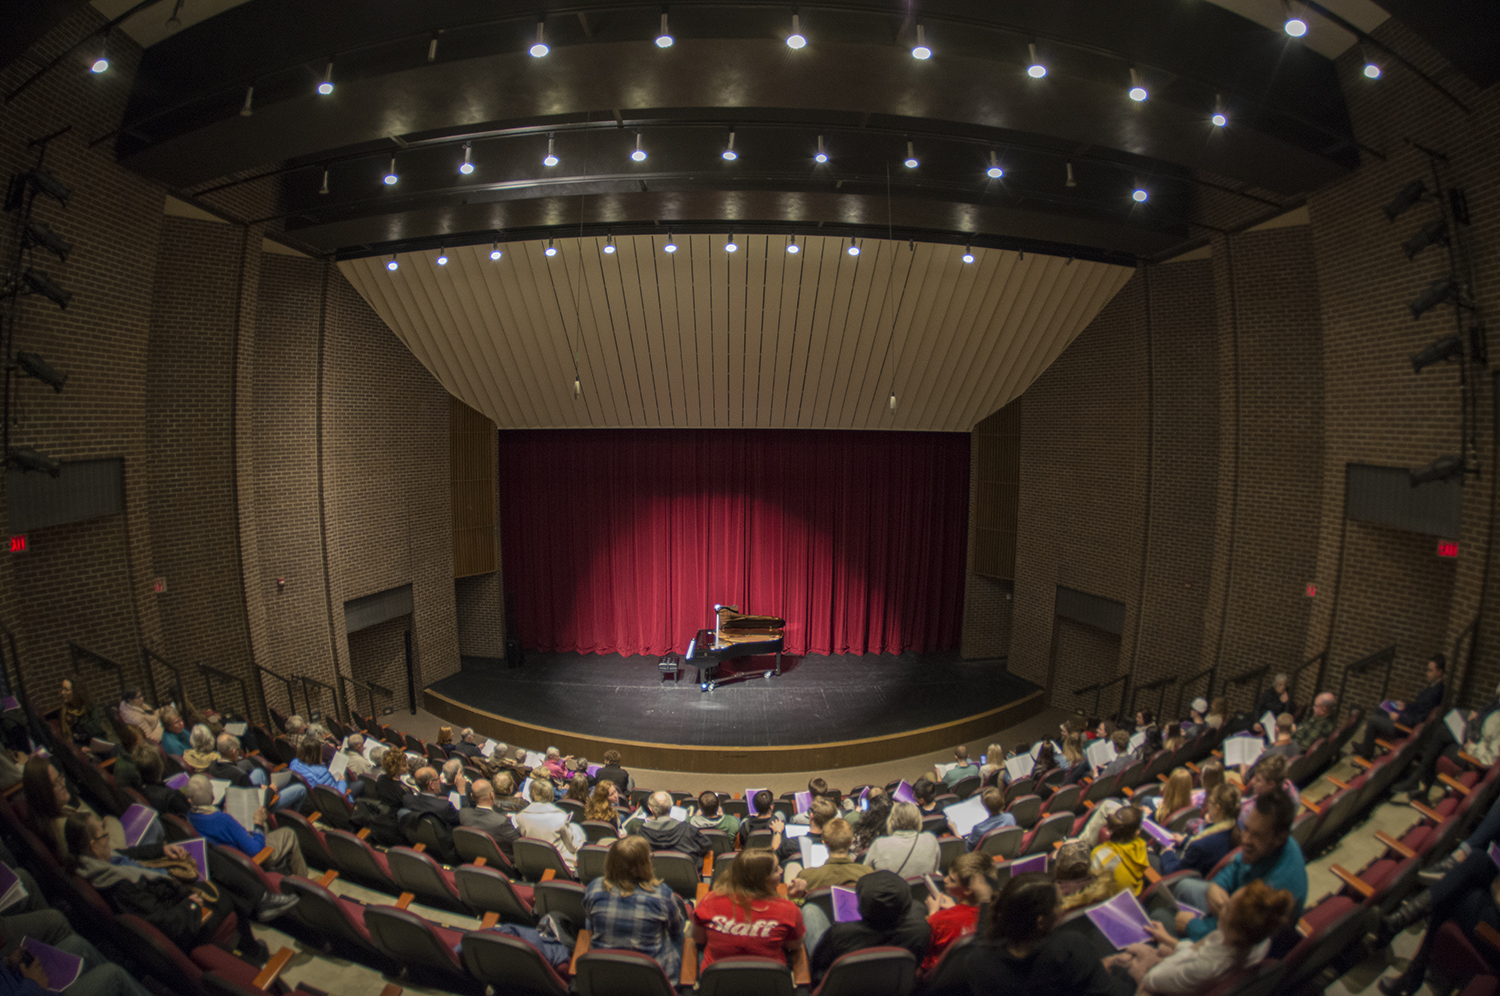 The Main Theatre in the Bangsburg Fine Arts Complex eager for the show to begin.